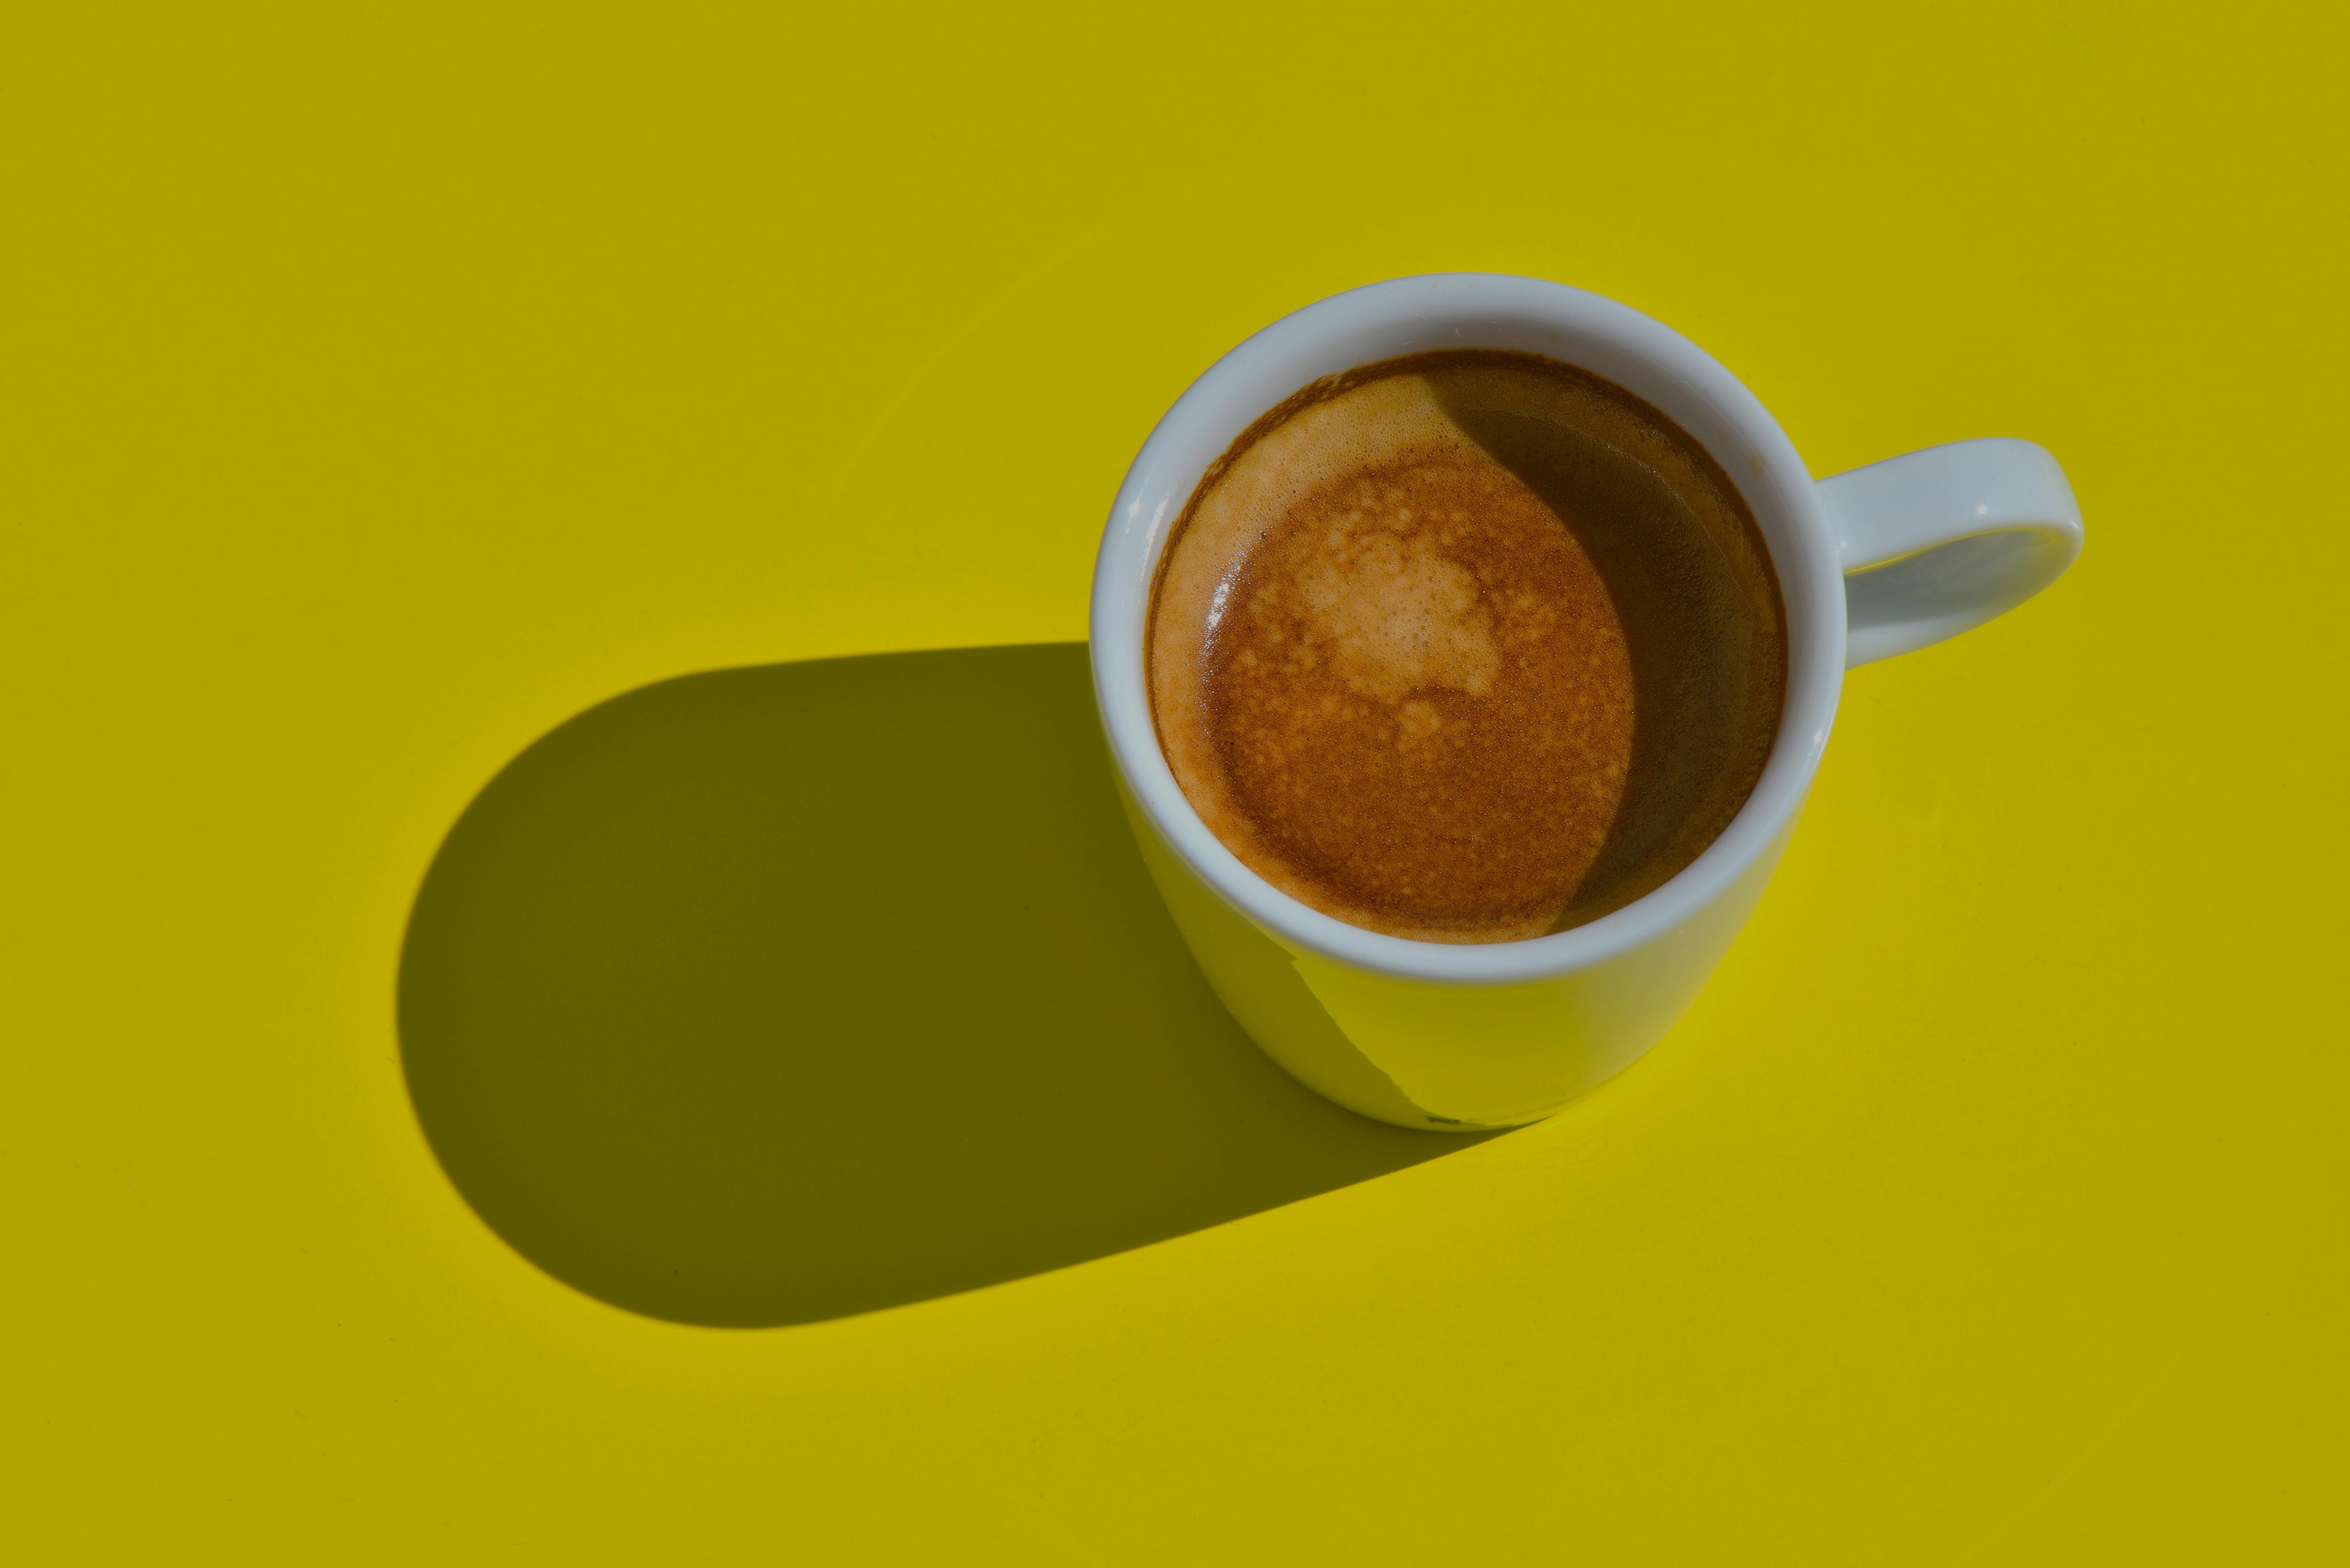 A cup of coffee sits on a yellow background